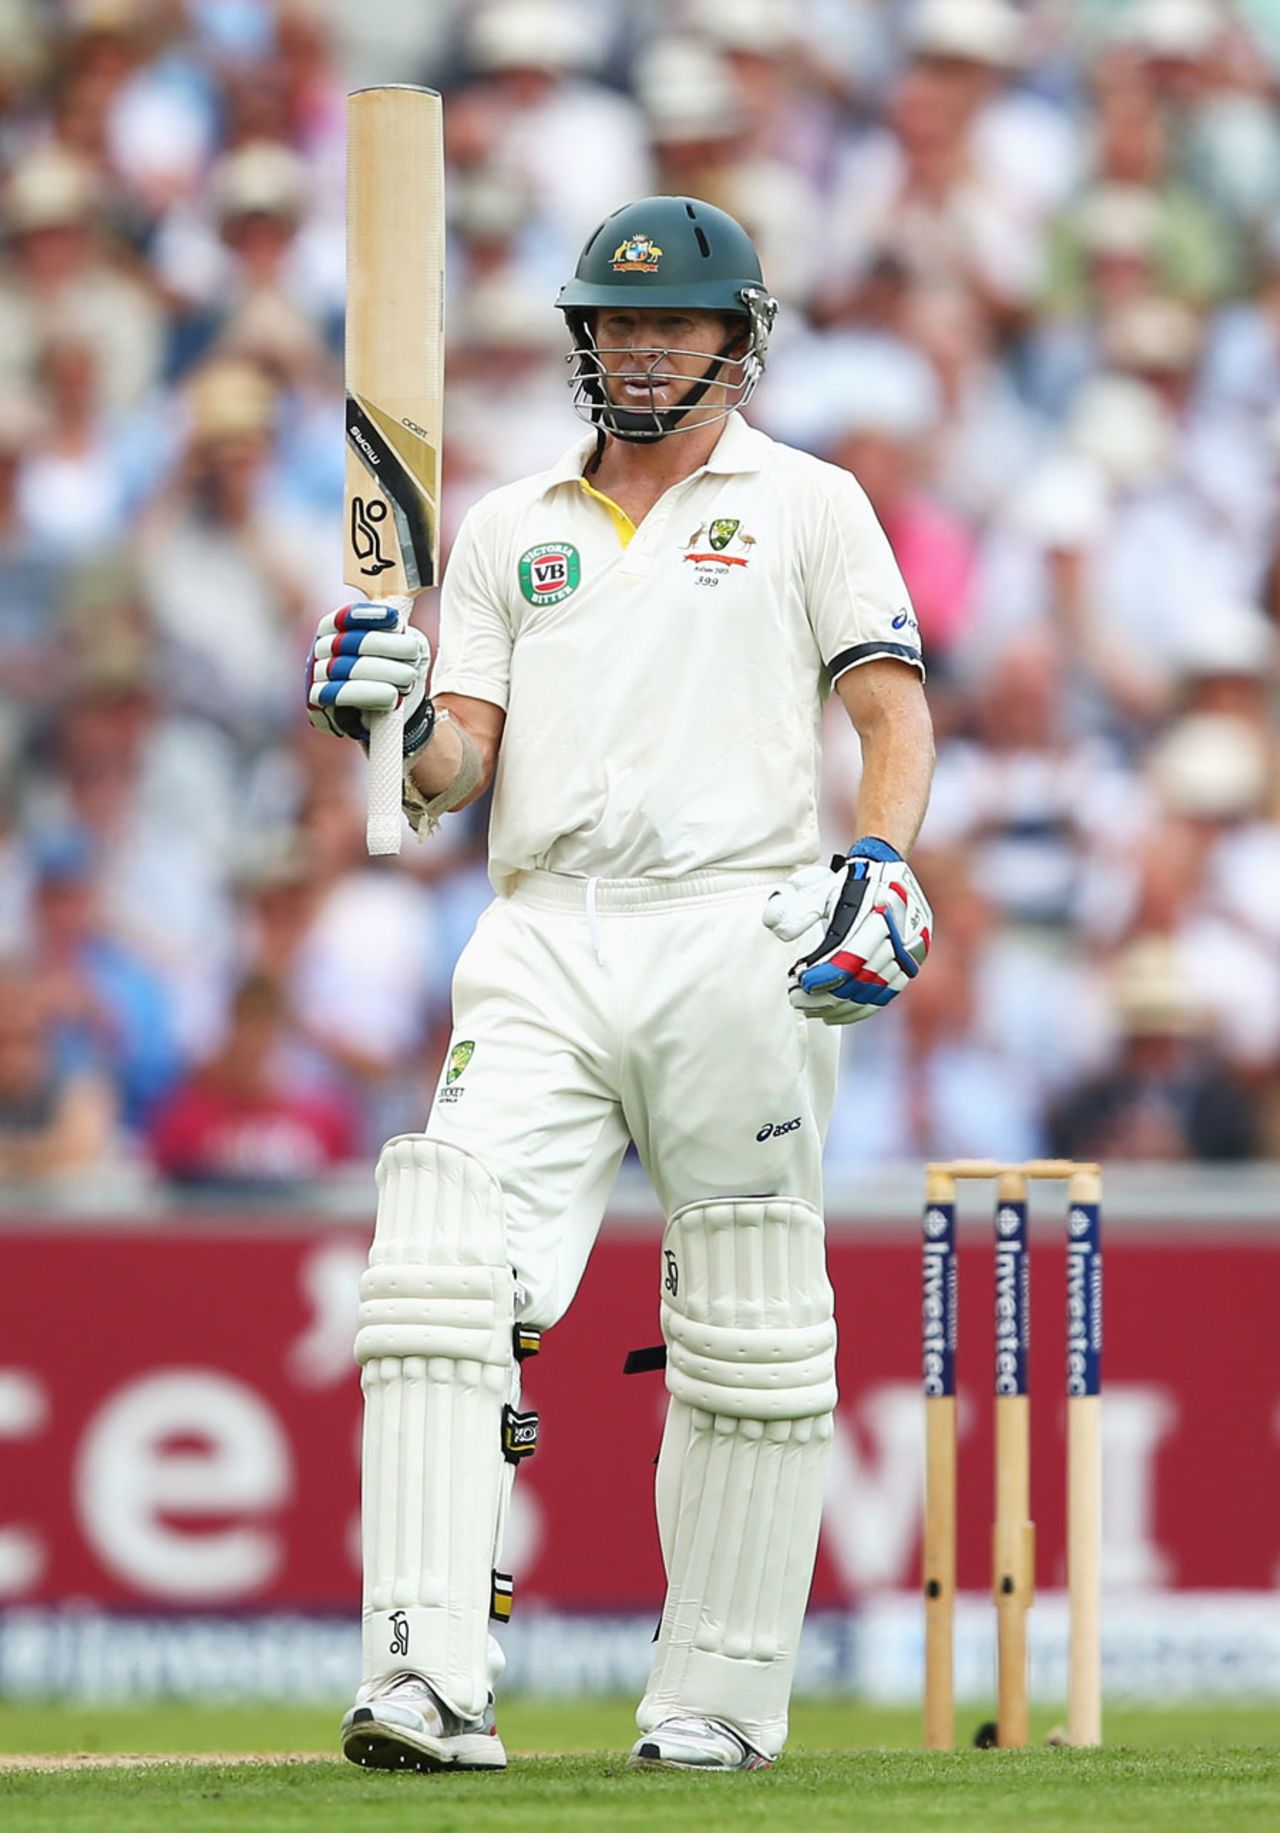 Chris Rogers recorded his second Test half-century, England v Australia, 3rd Investec Test, Old Trafford, 1st day, August 1, 2013